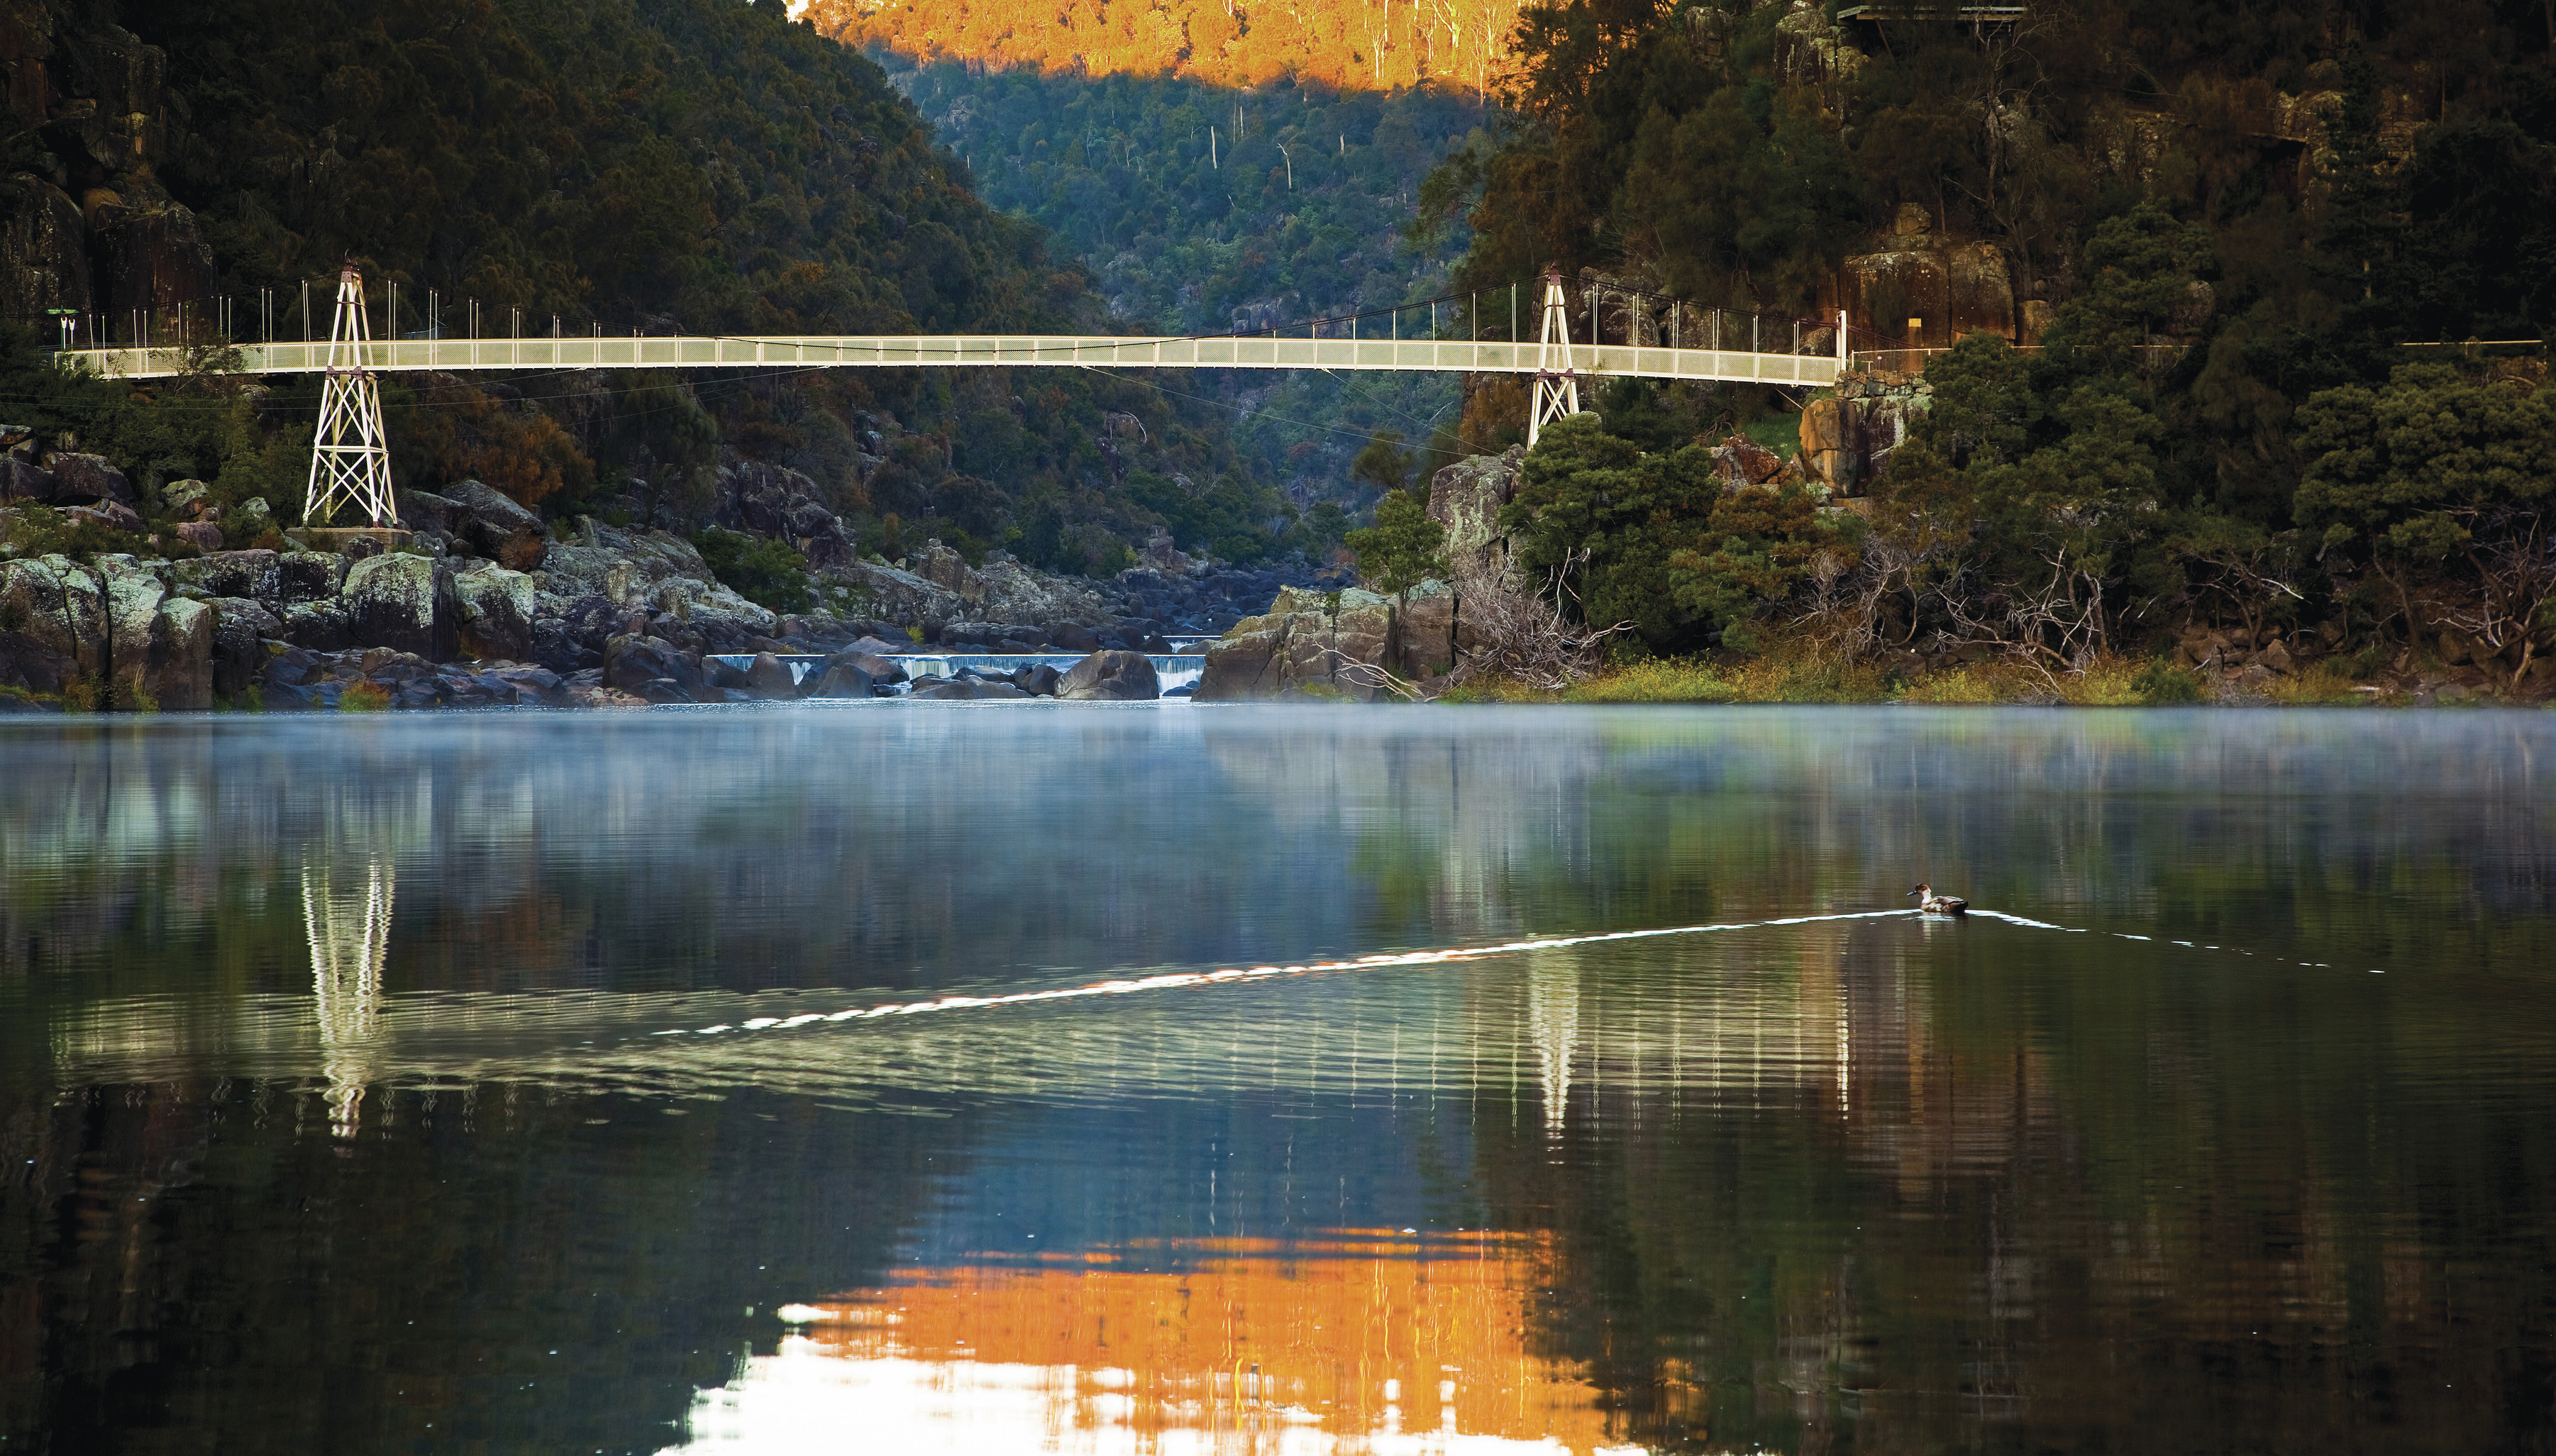 The Suspension bridge reflects on the still water at Cataract Gorge Reserve.